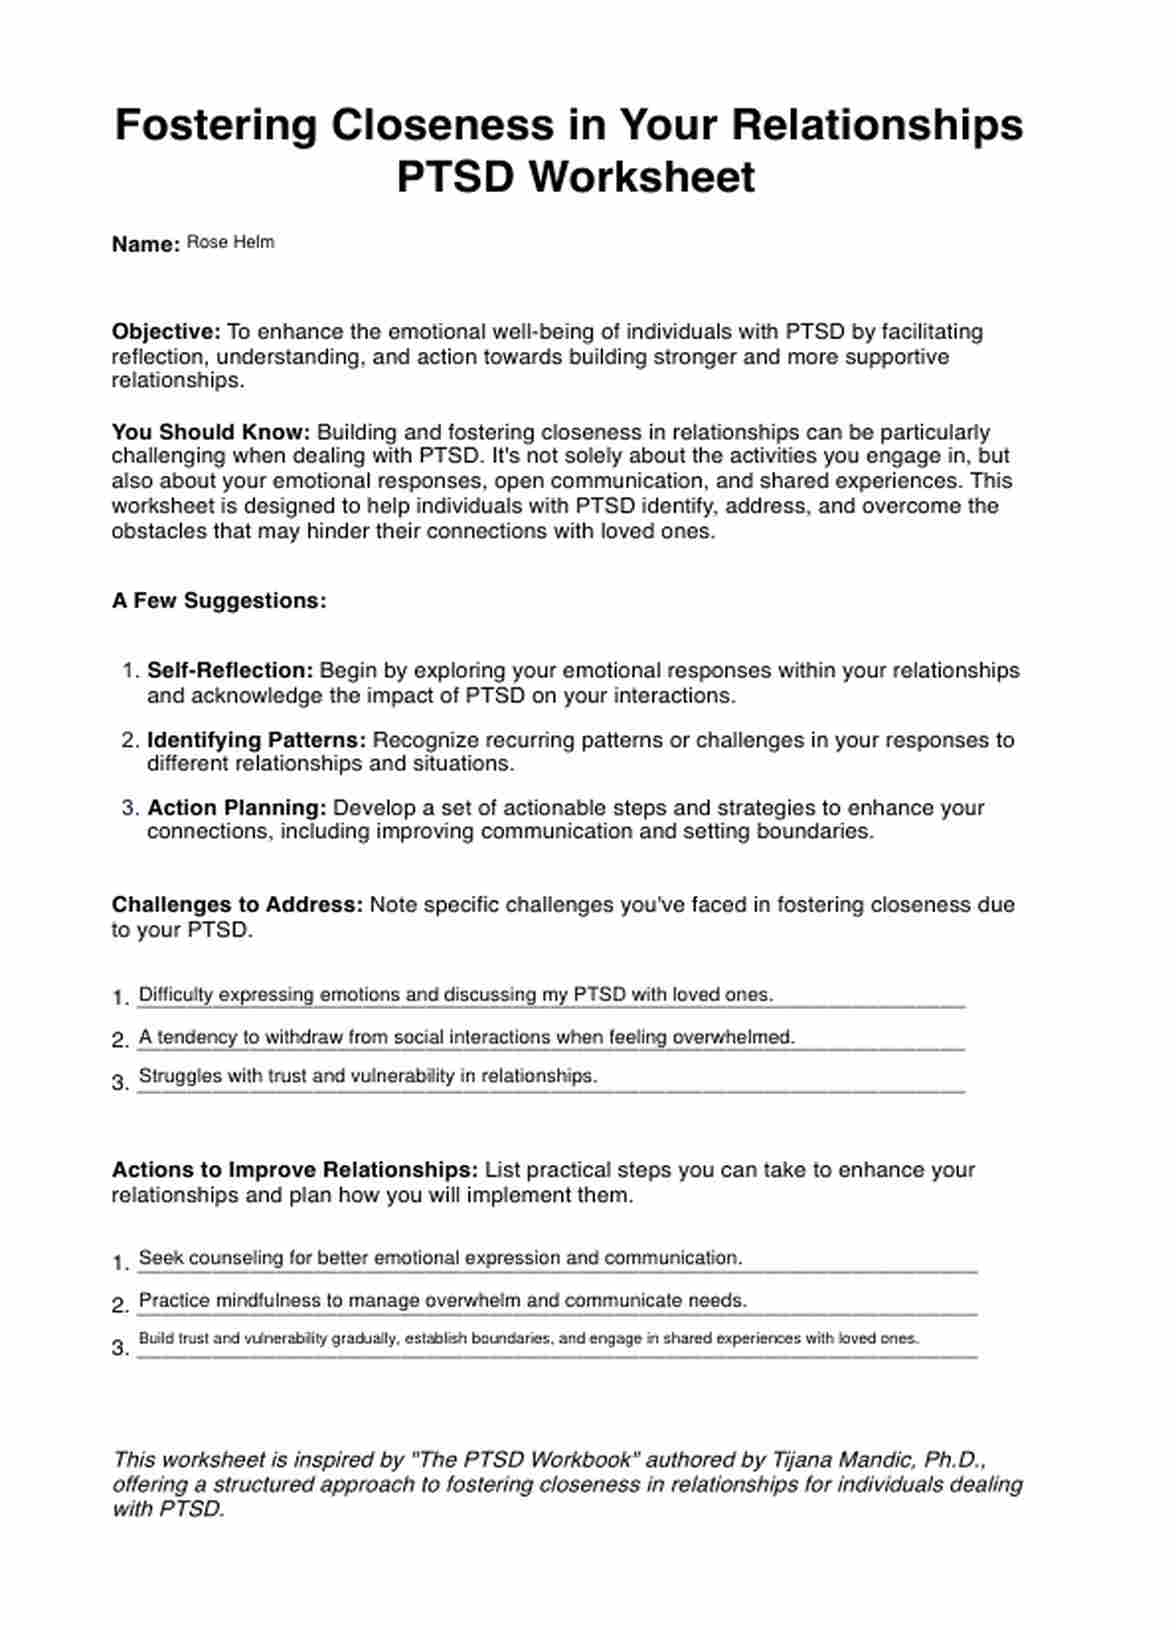 Fostering Closeness in Your Relationships PTSD Worksheet PDF Example